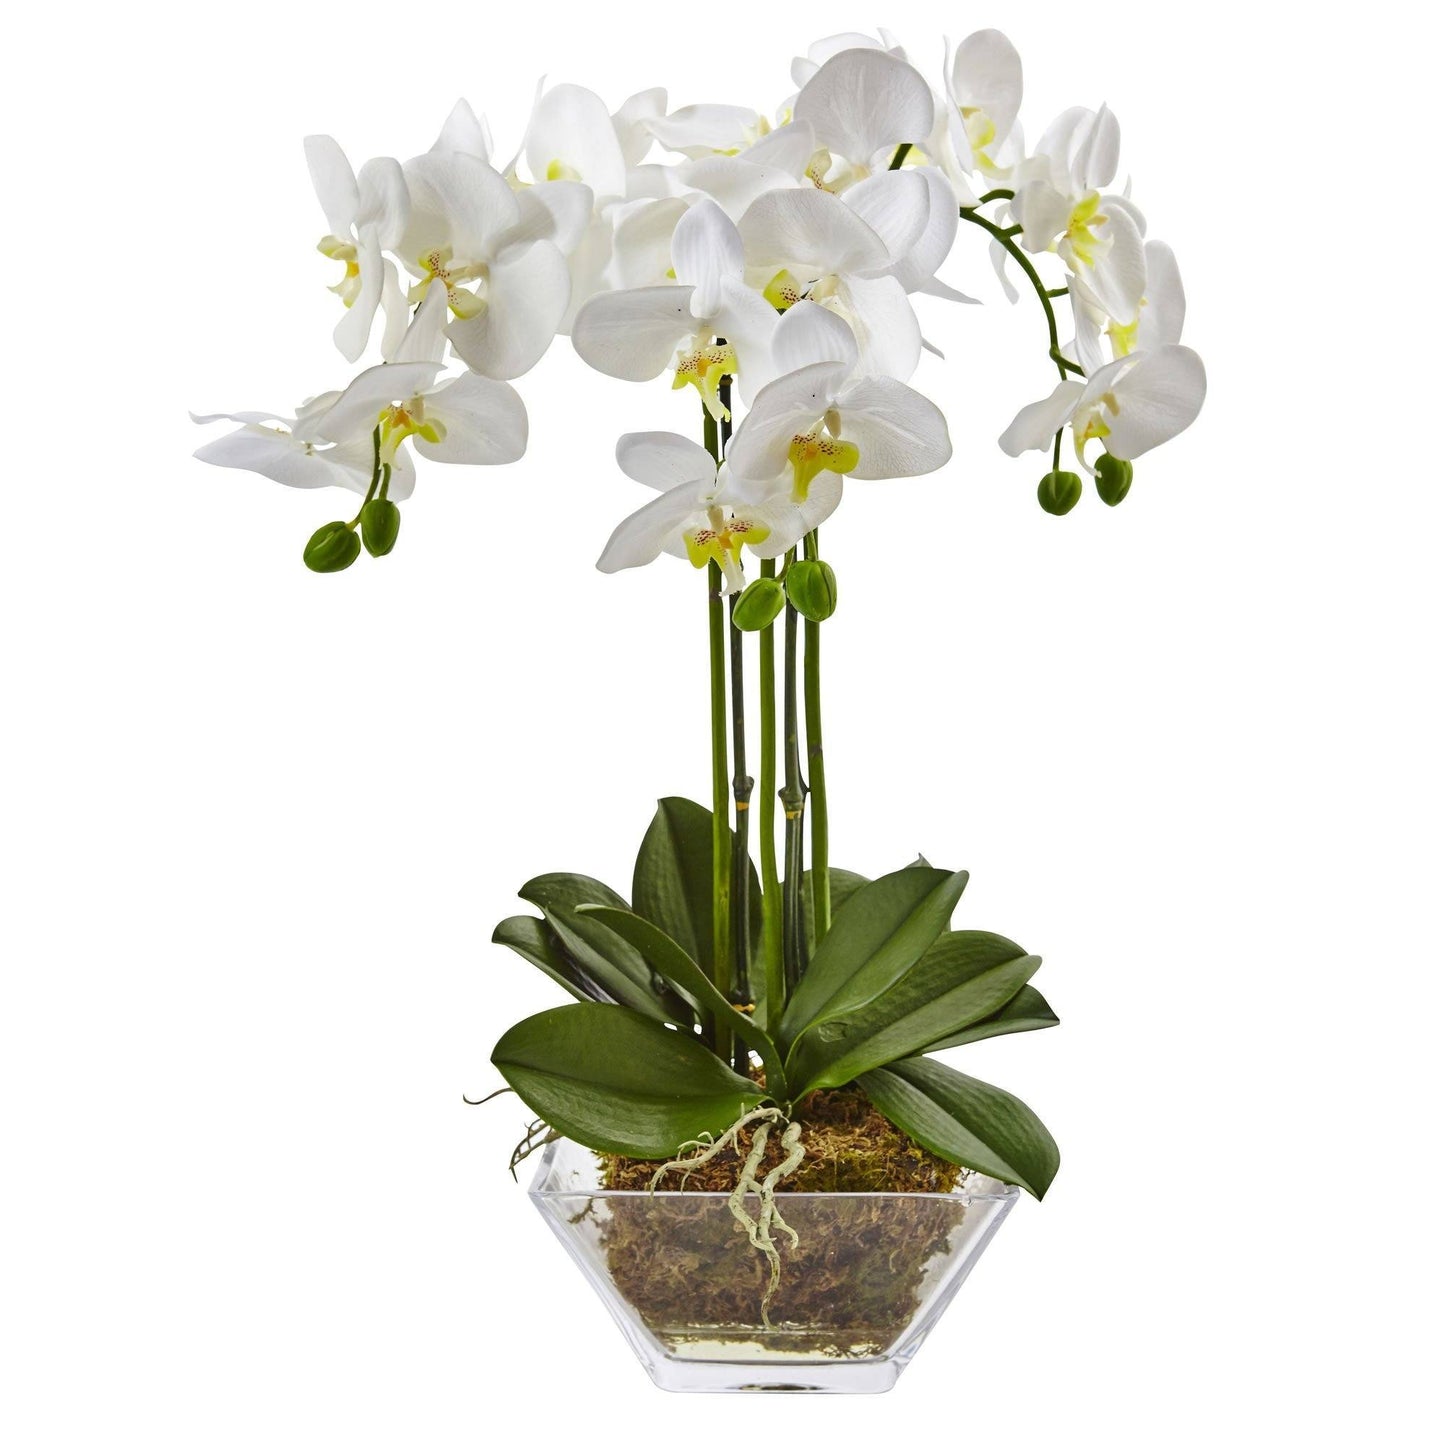 Triple Phalaenopsis Orchid in Glass Vase by Nearly Natural